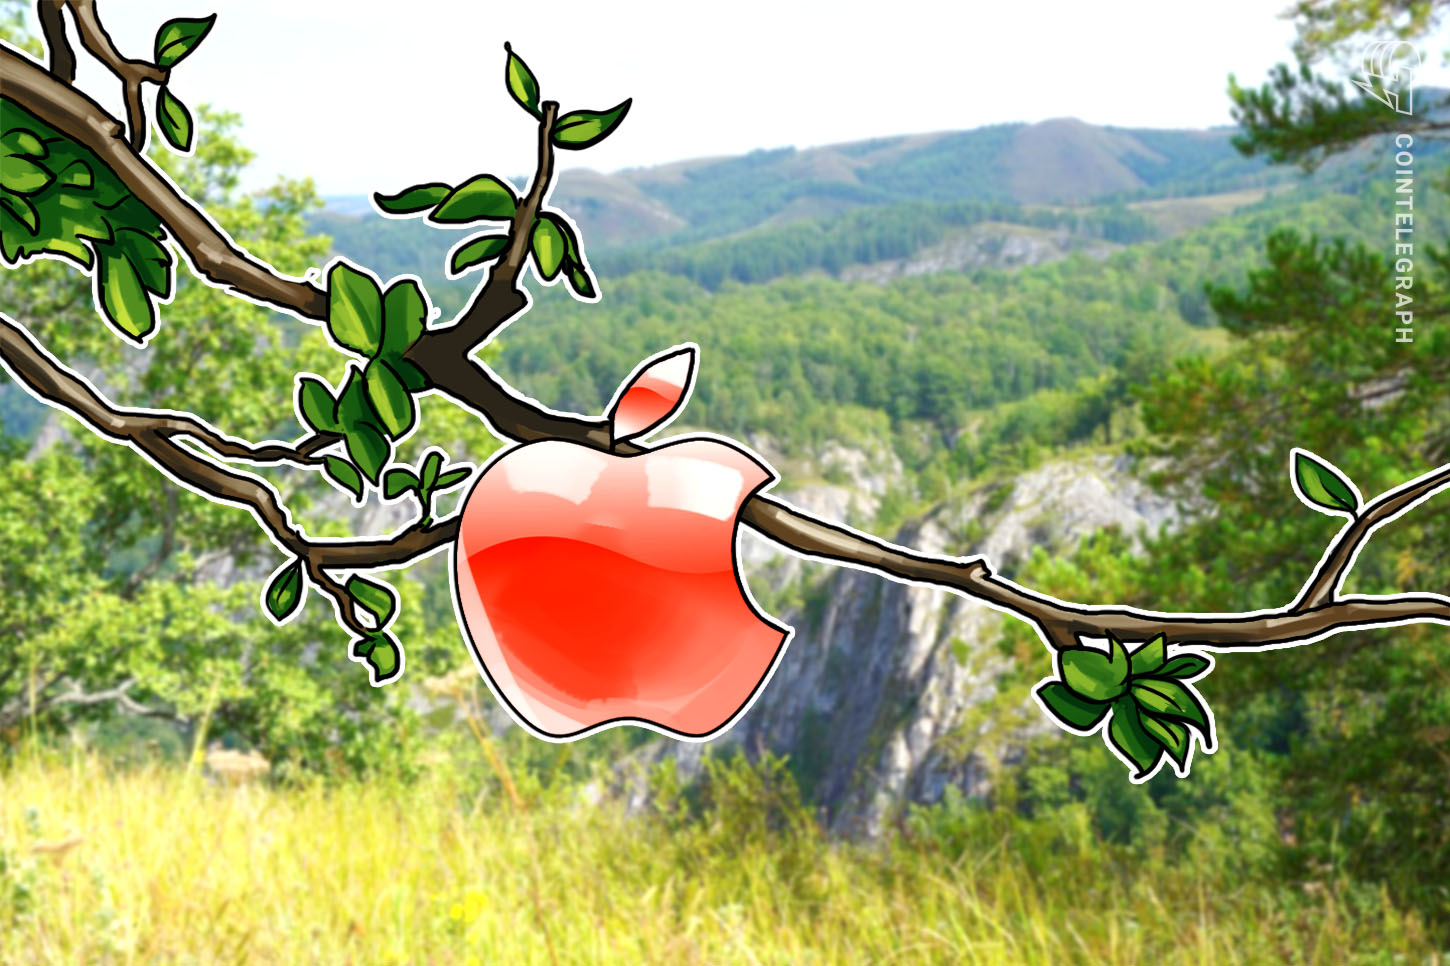 Bitcoin Is the ‘New’ Apple — How BTC Value May Attain $60,000 by 2023